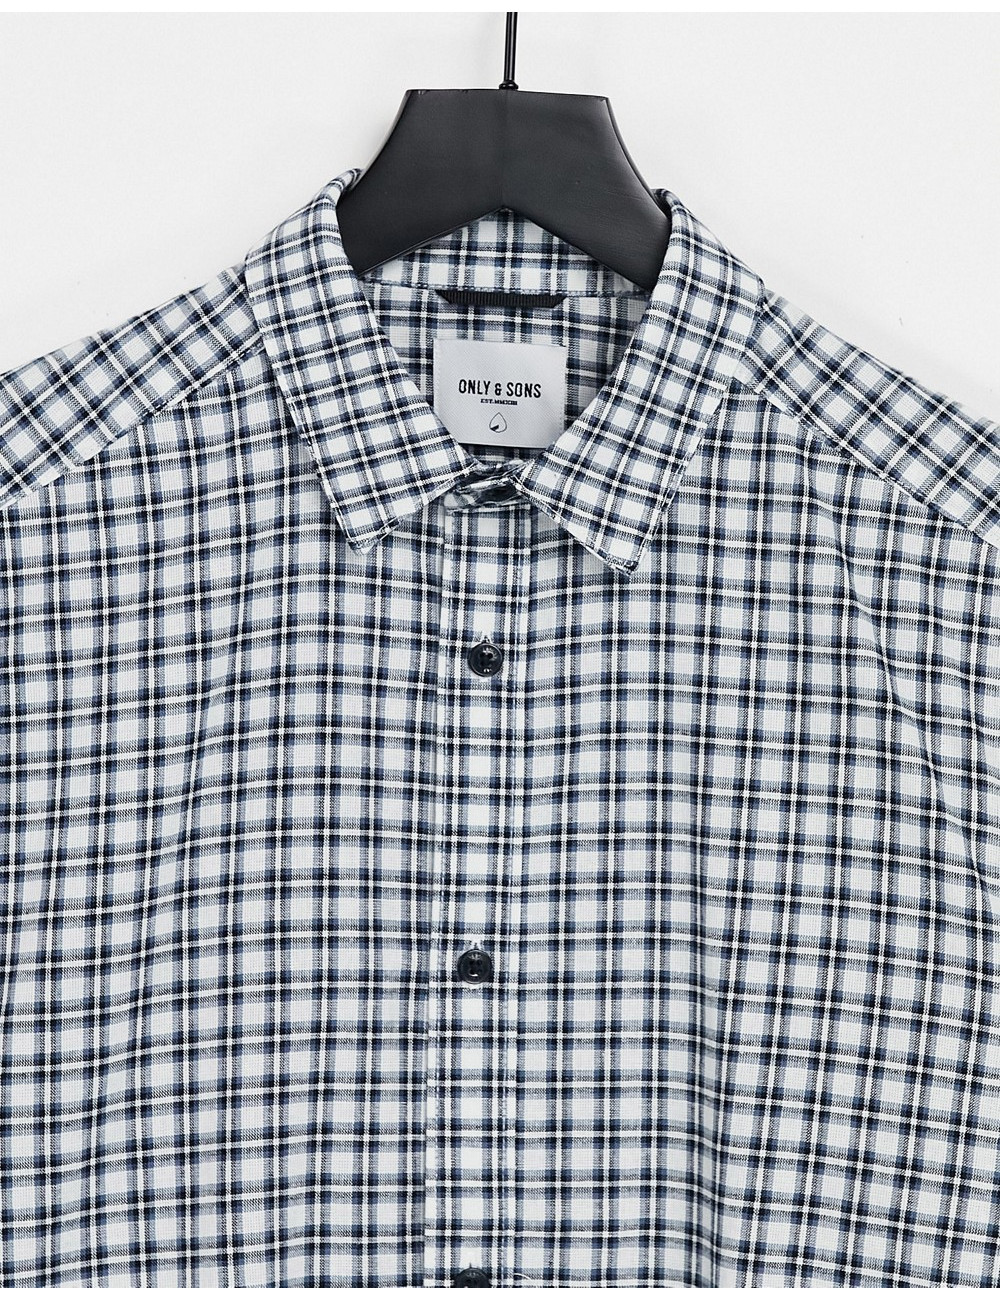 Only & Sons check shirt in...